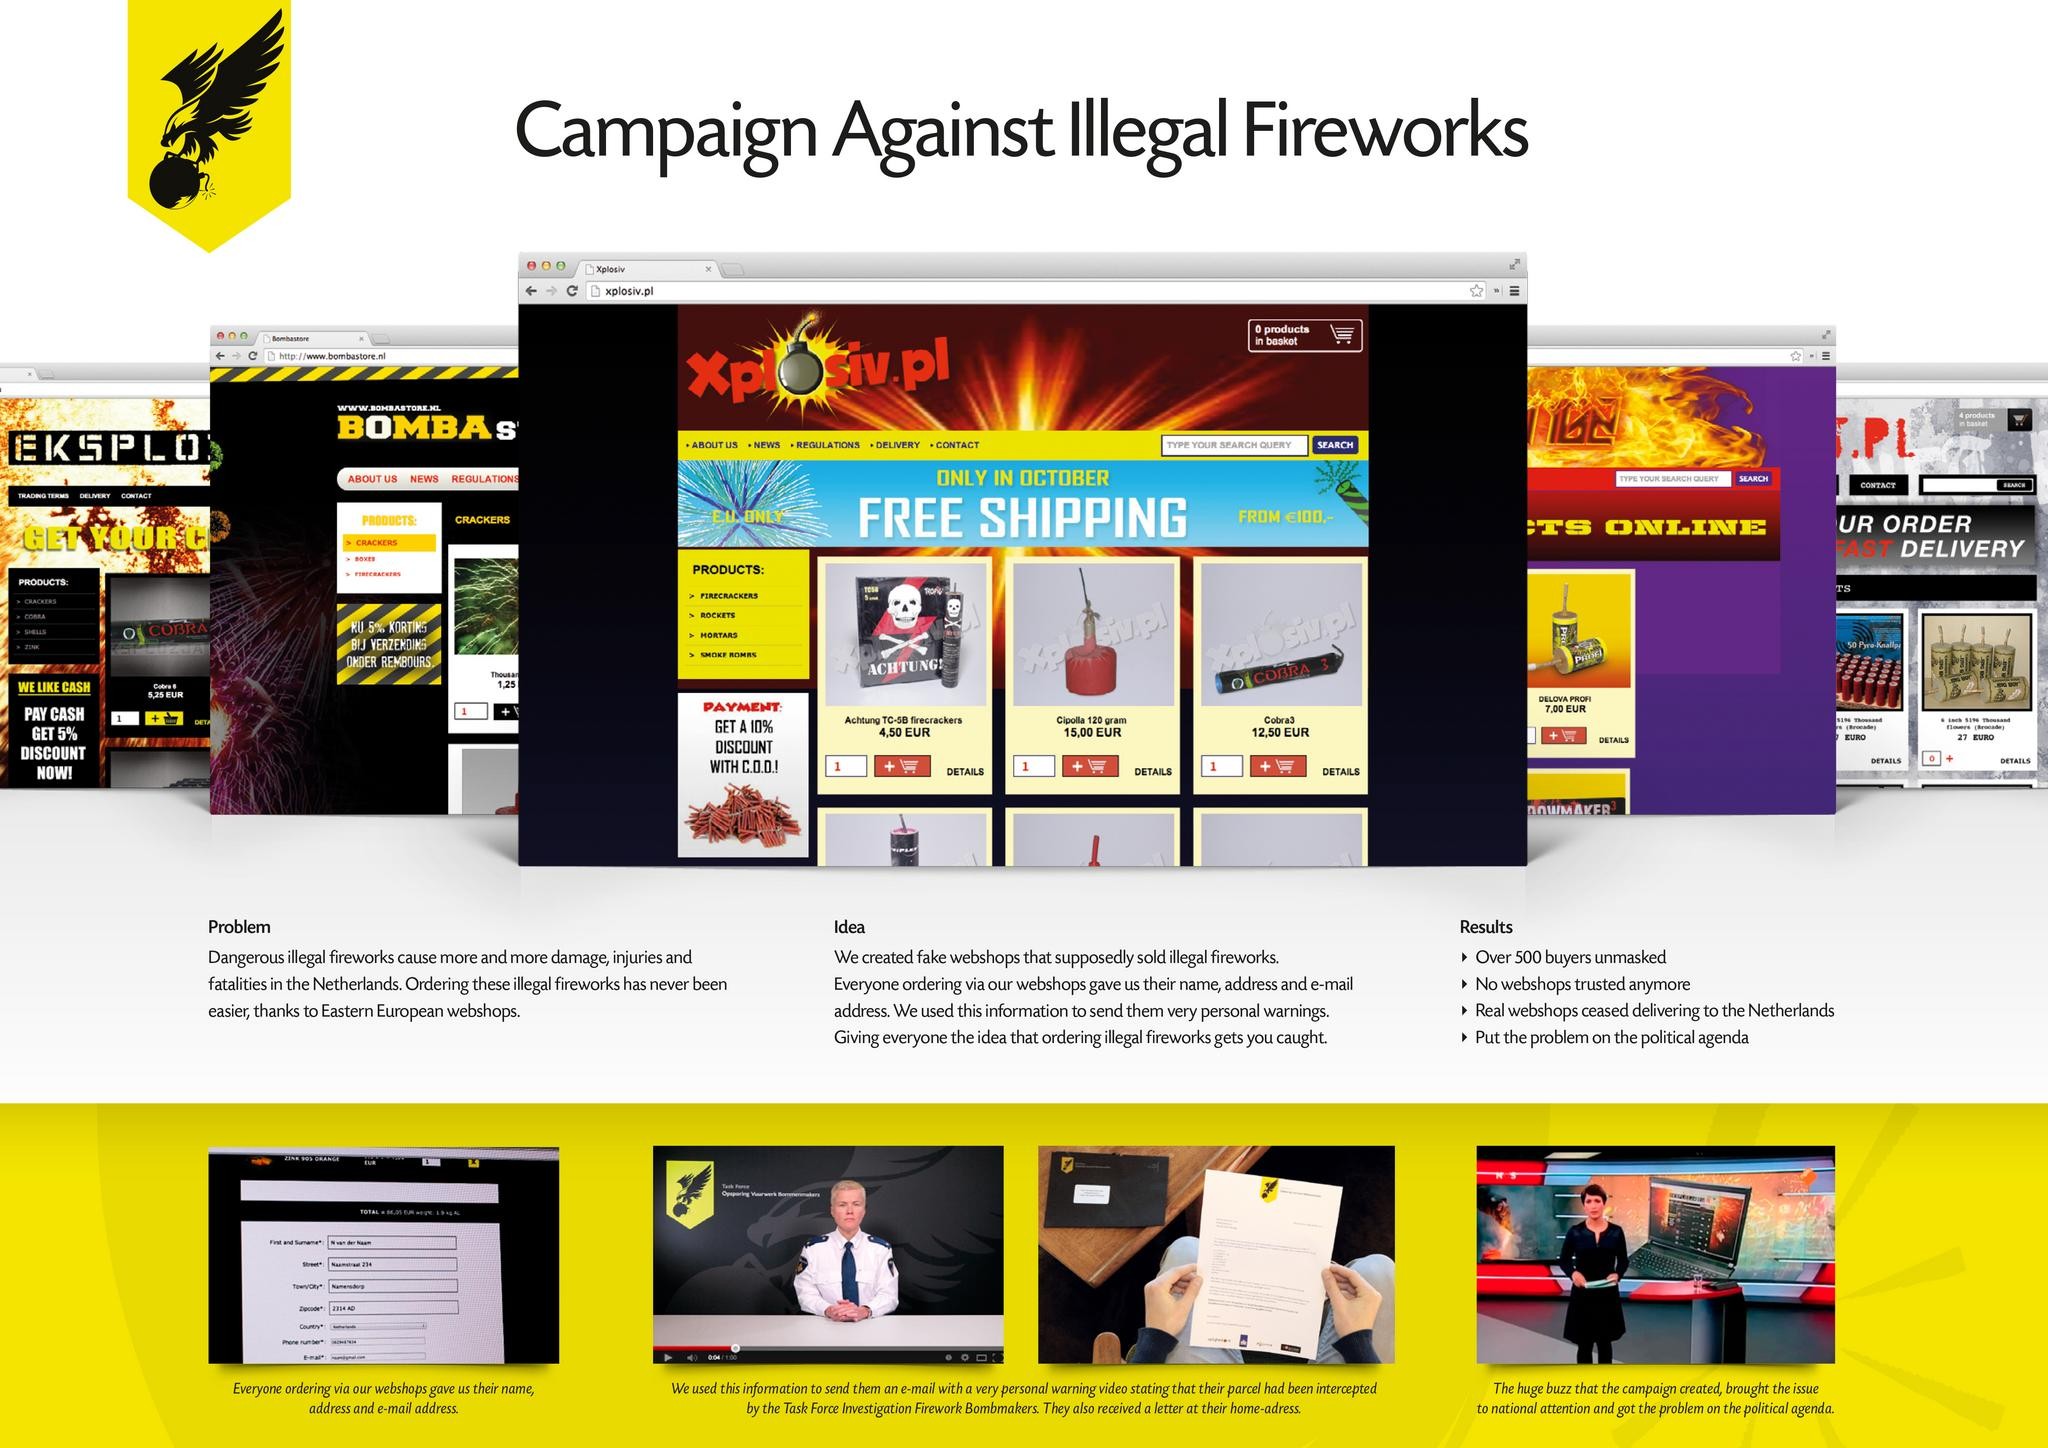 CAMPAIGN AGAINST ILLEGAL FIREWORKS